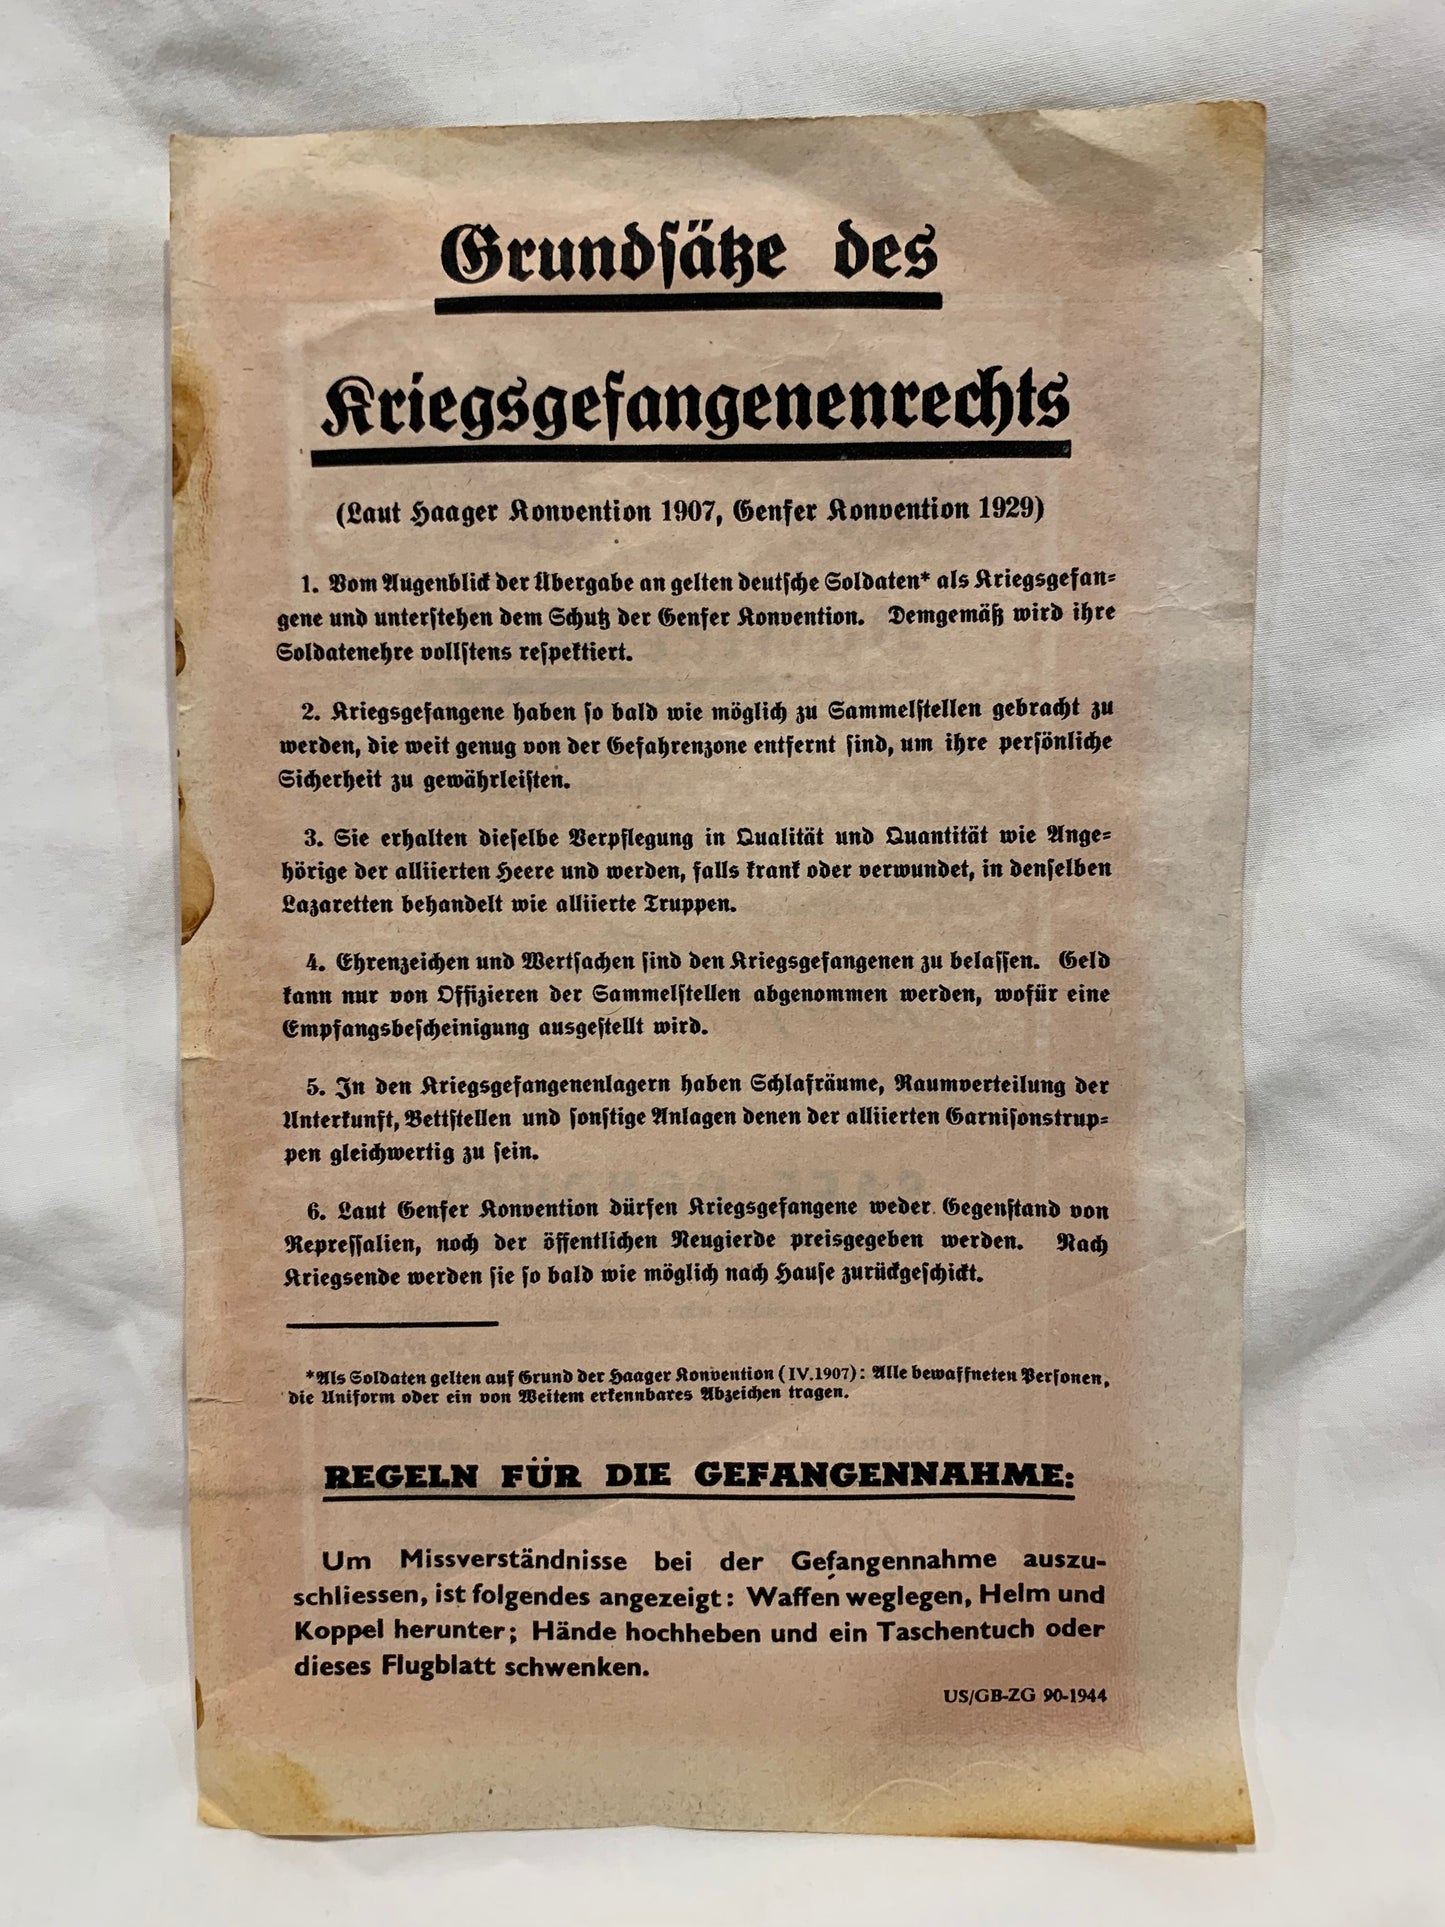 WW2 Safe Conduct Leaflet dropped by the Allies at Normandy 1944